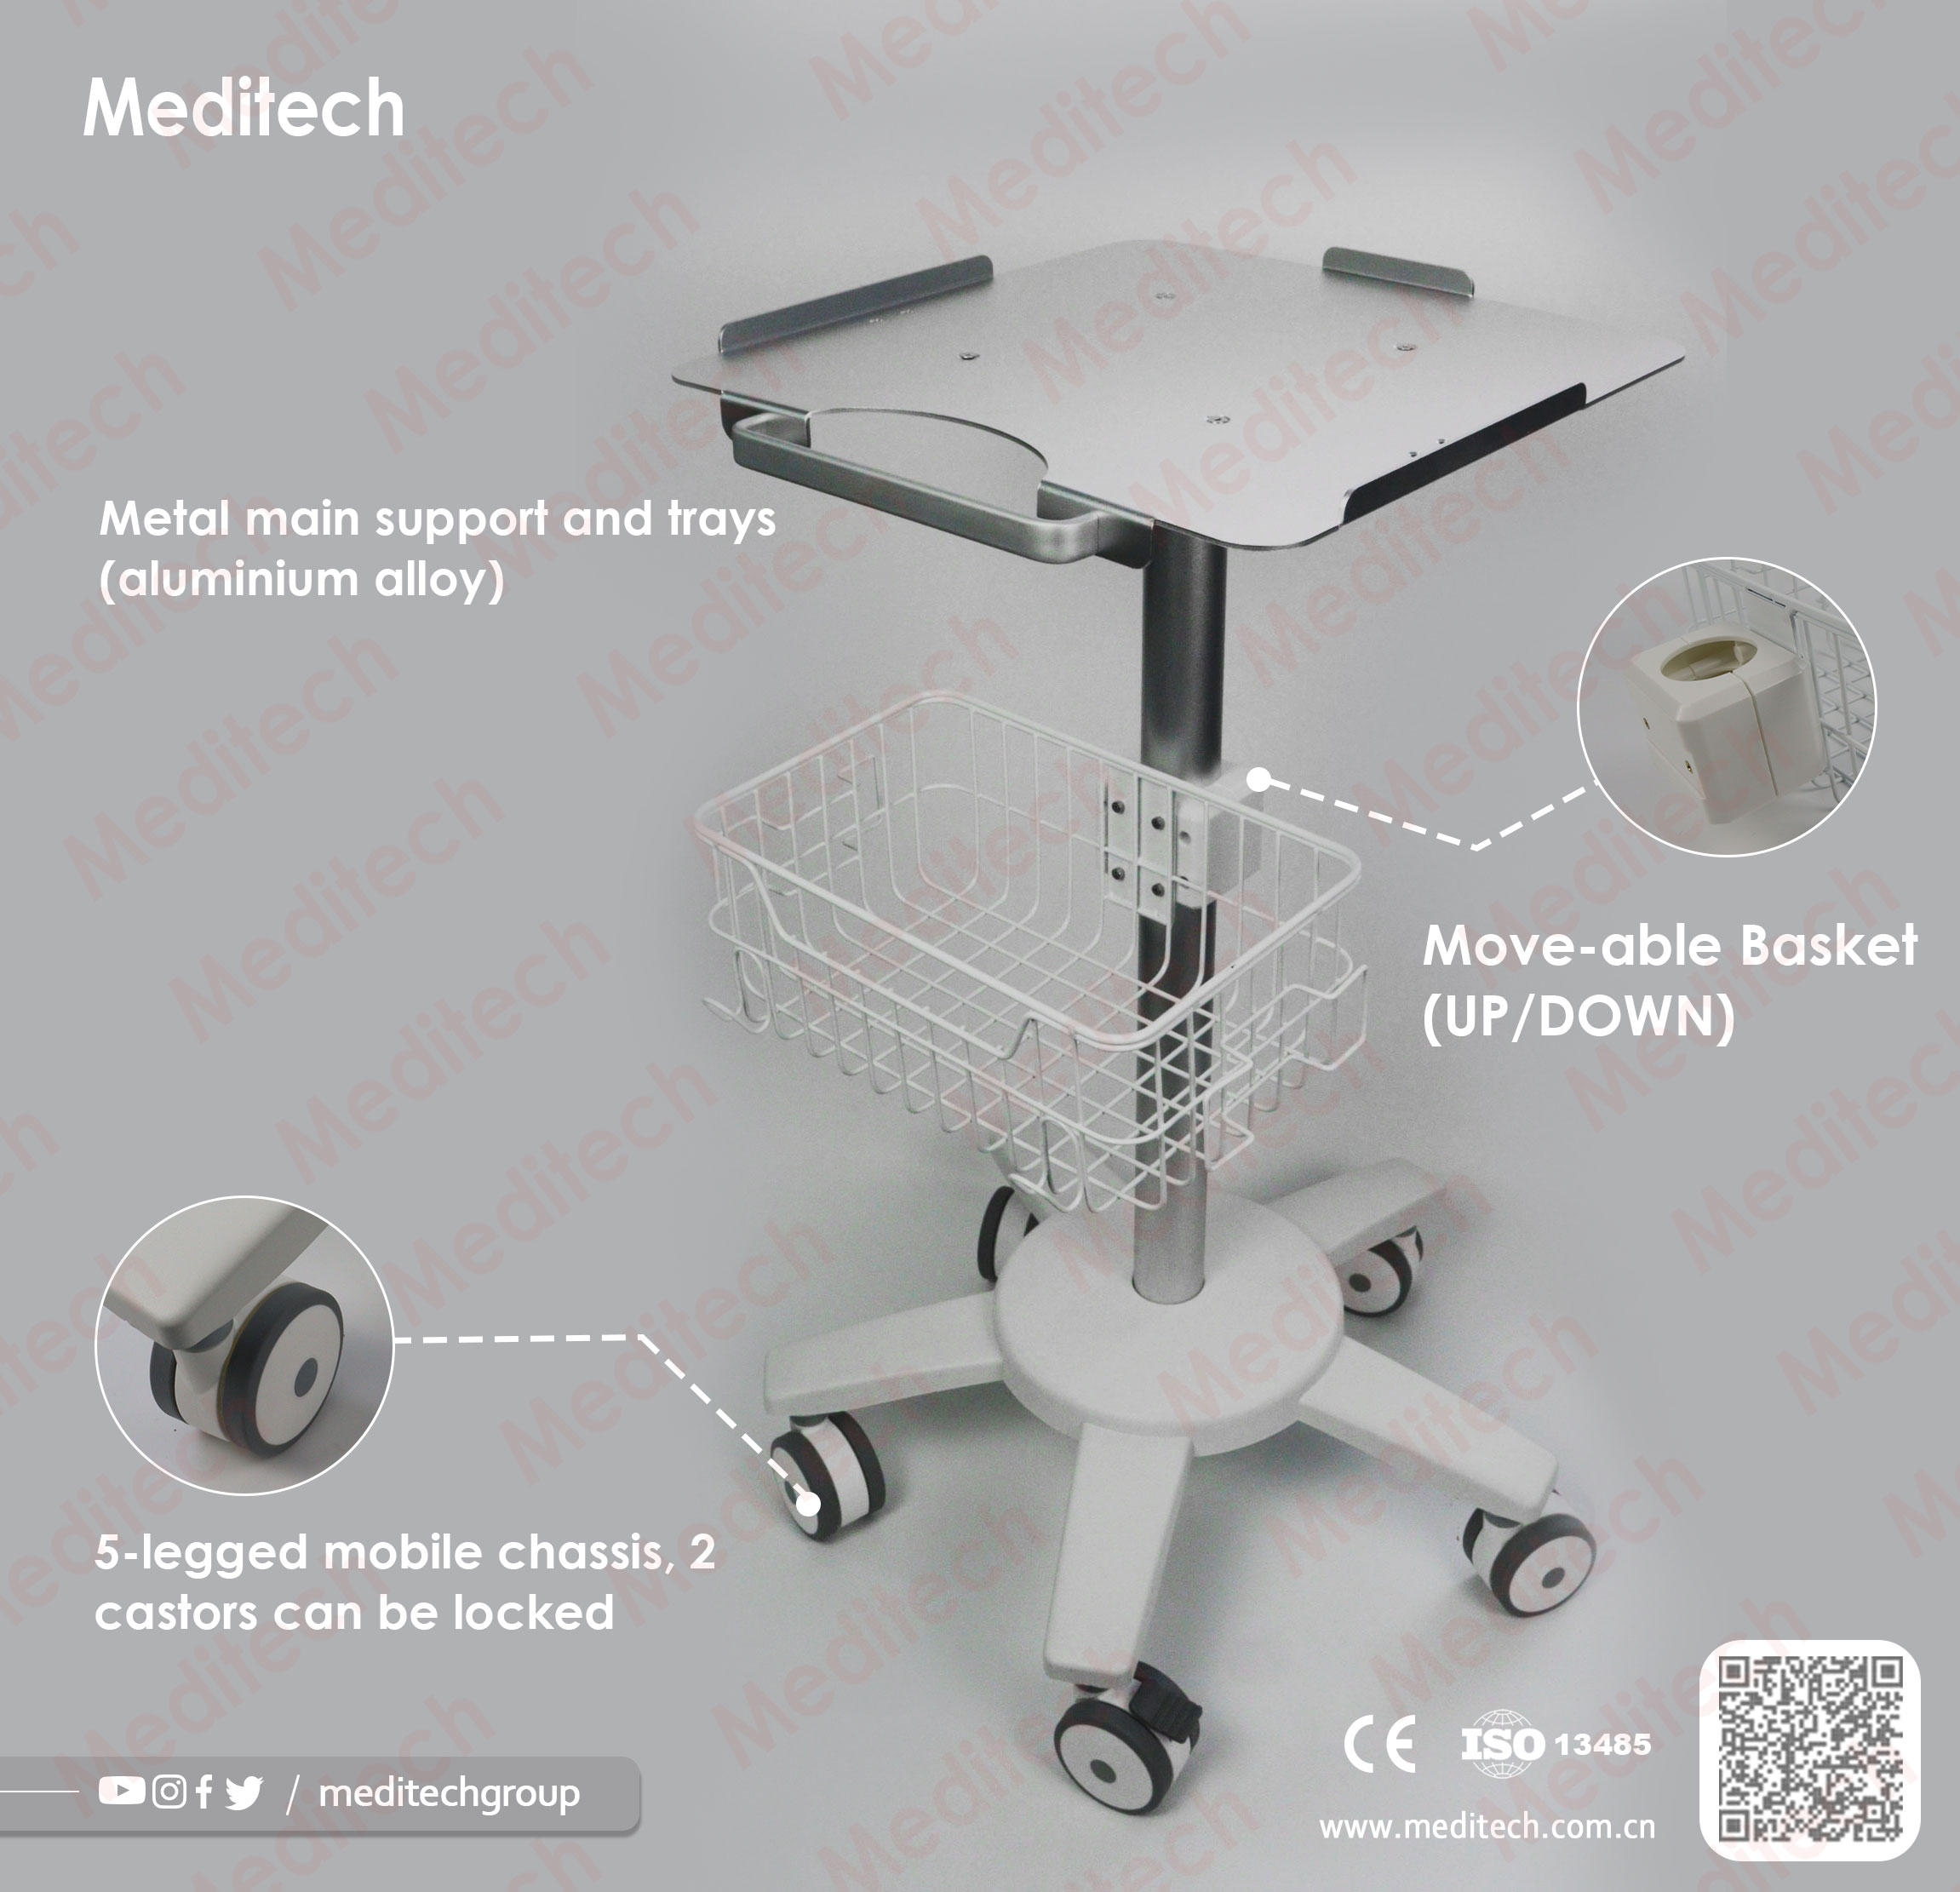 Mobile trolley for the Meditech ECG machines